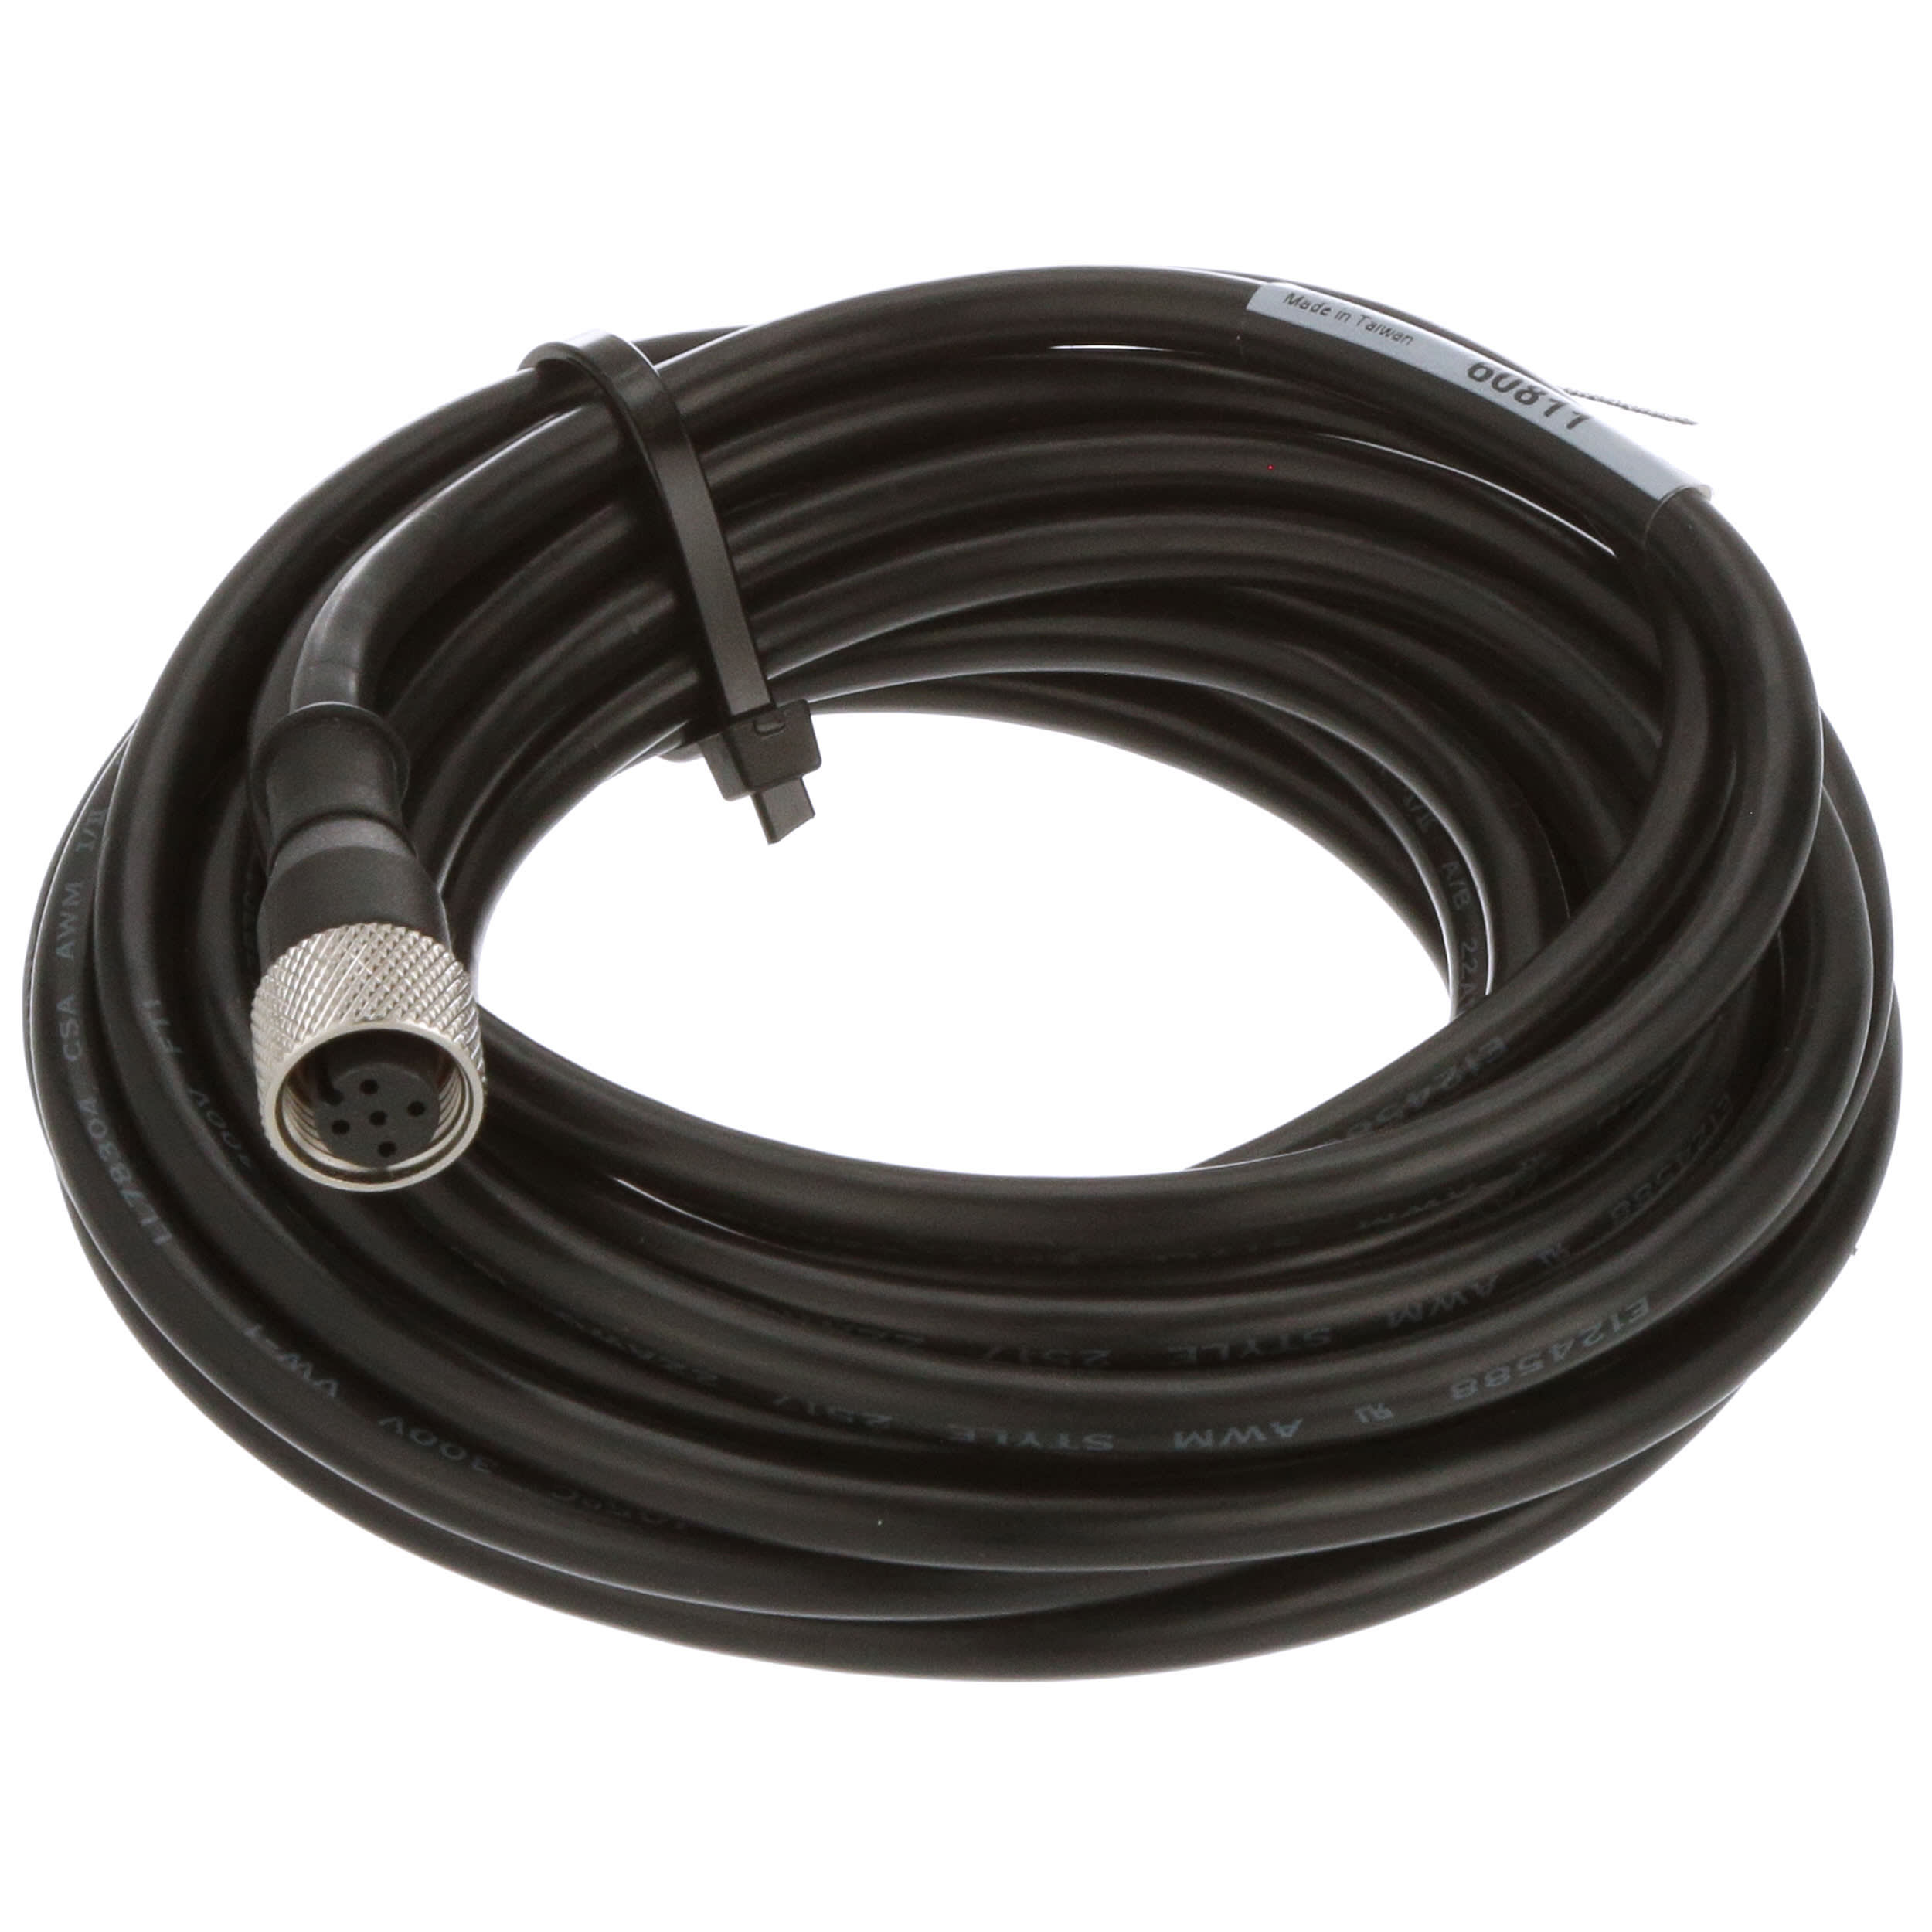 New Banner PKG4-2 4 Pin Straight Connector 32439 2 Meter Cable R7 